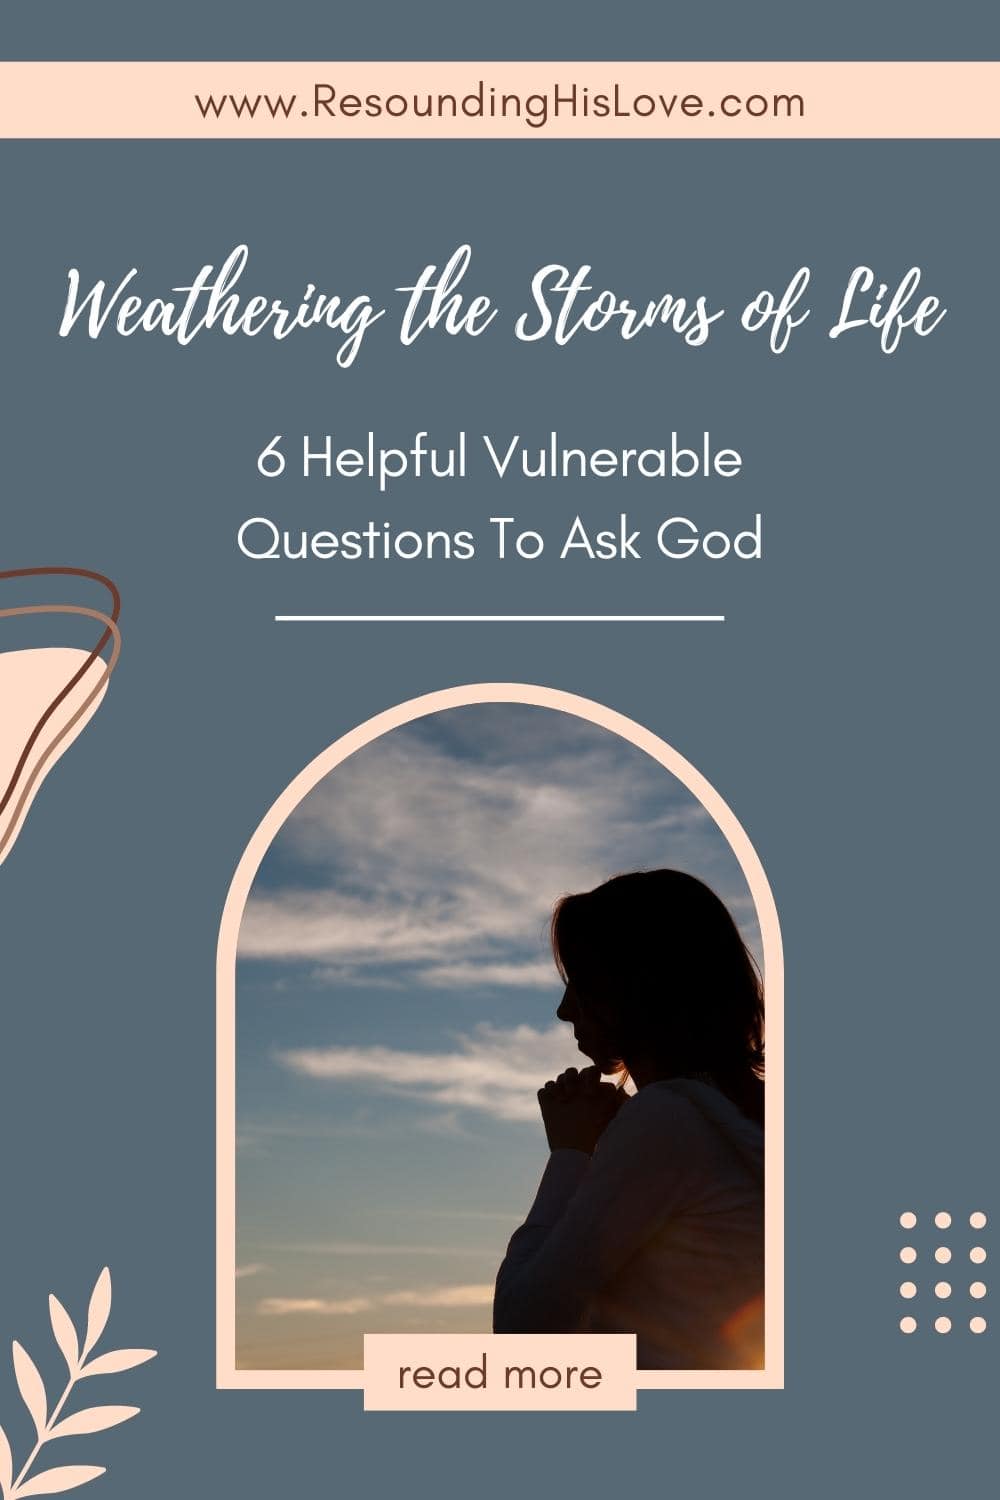 Storms of Life: 6 Vulnerable Questions To Ask God